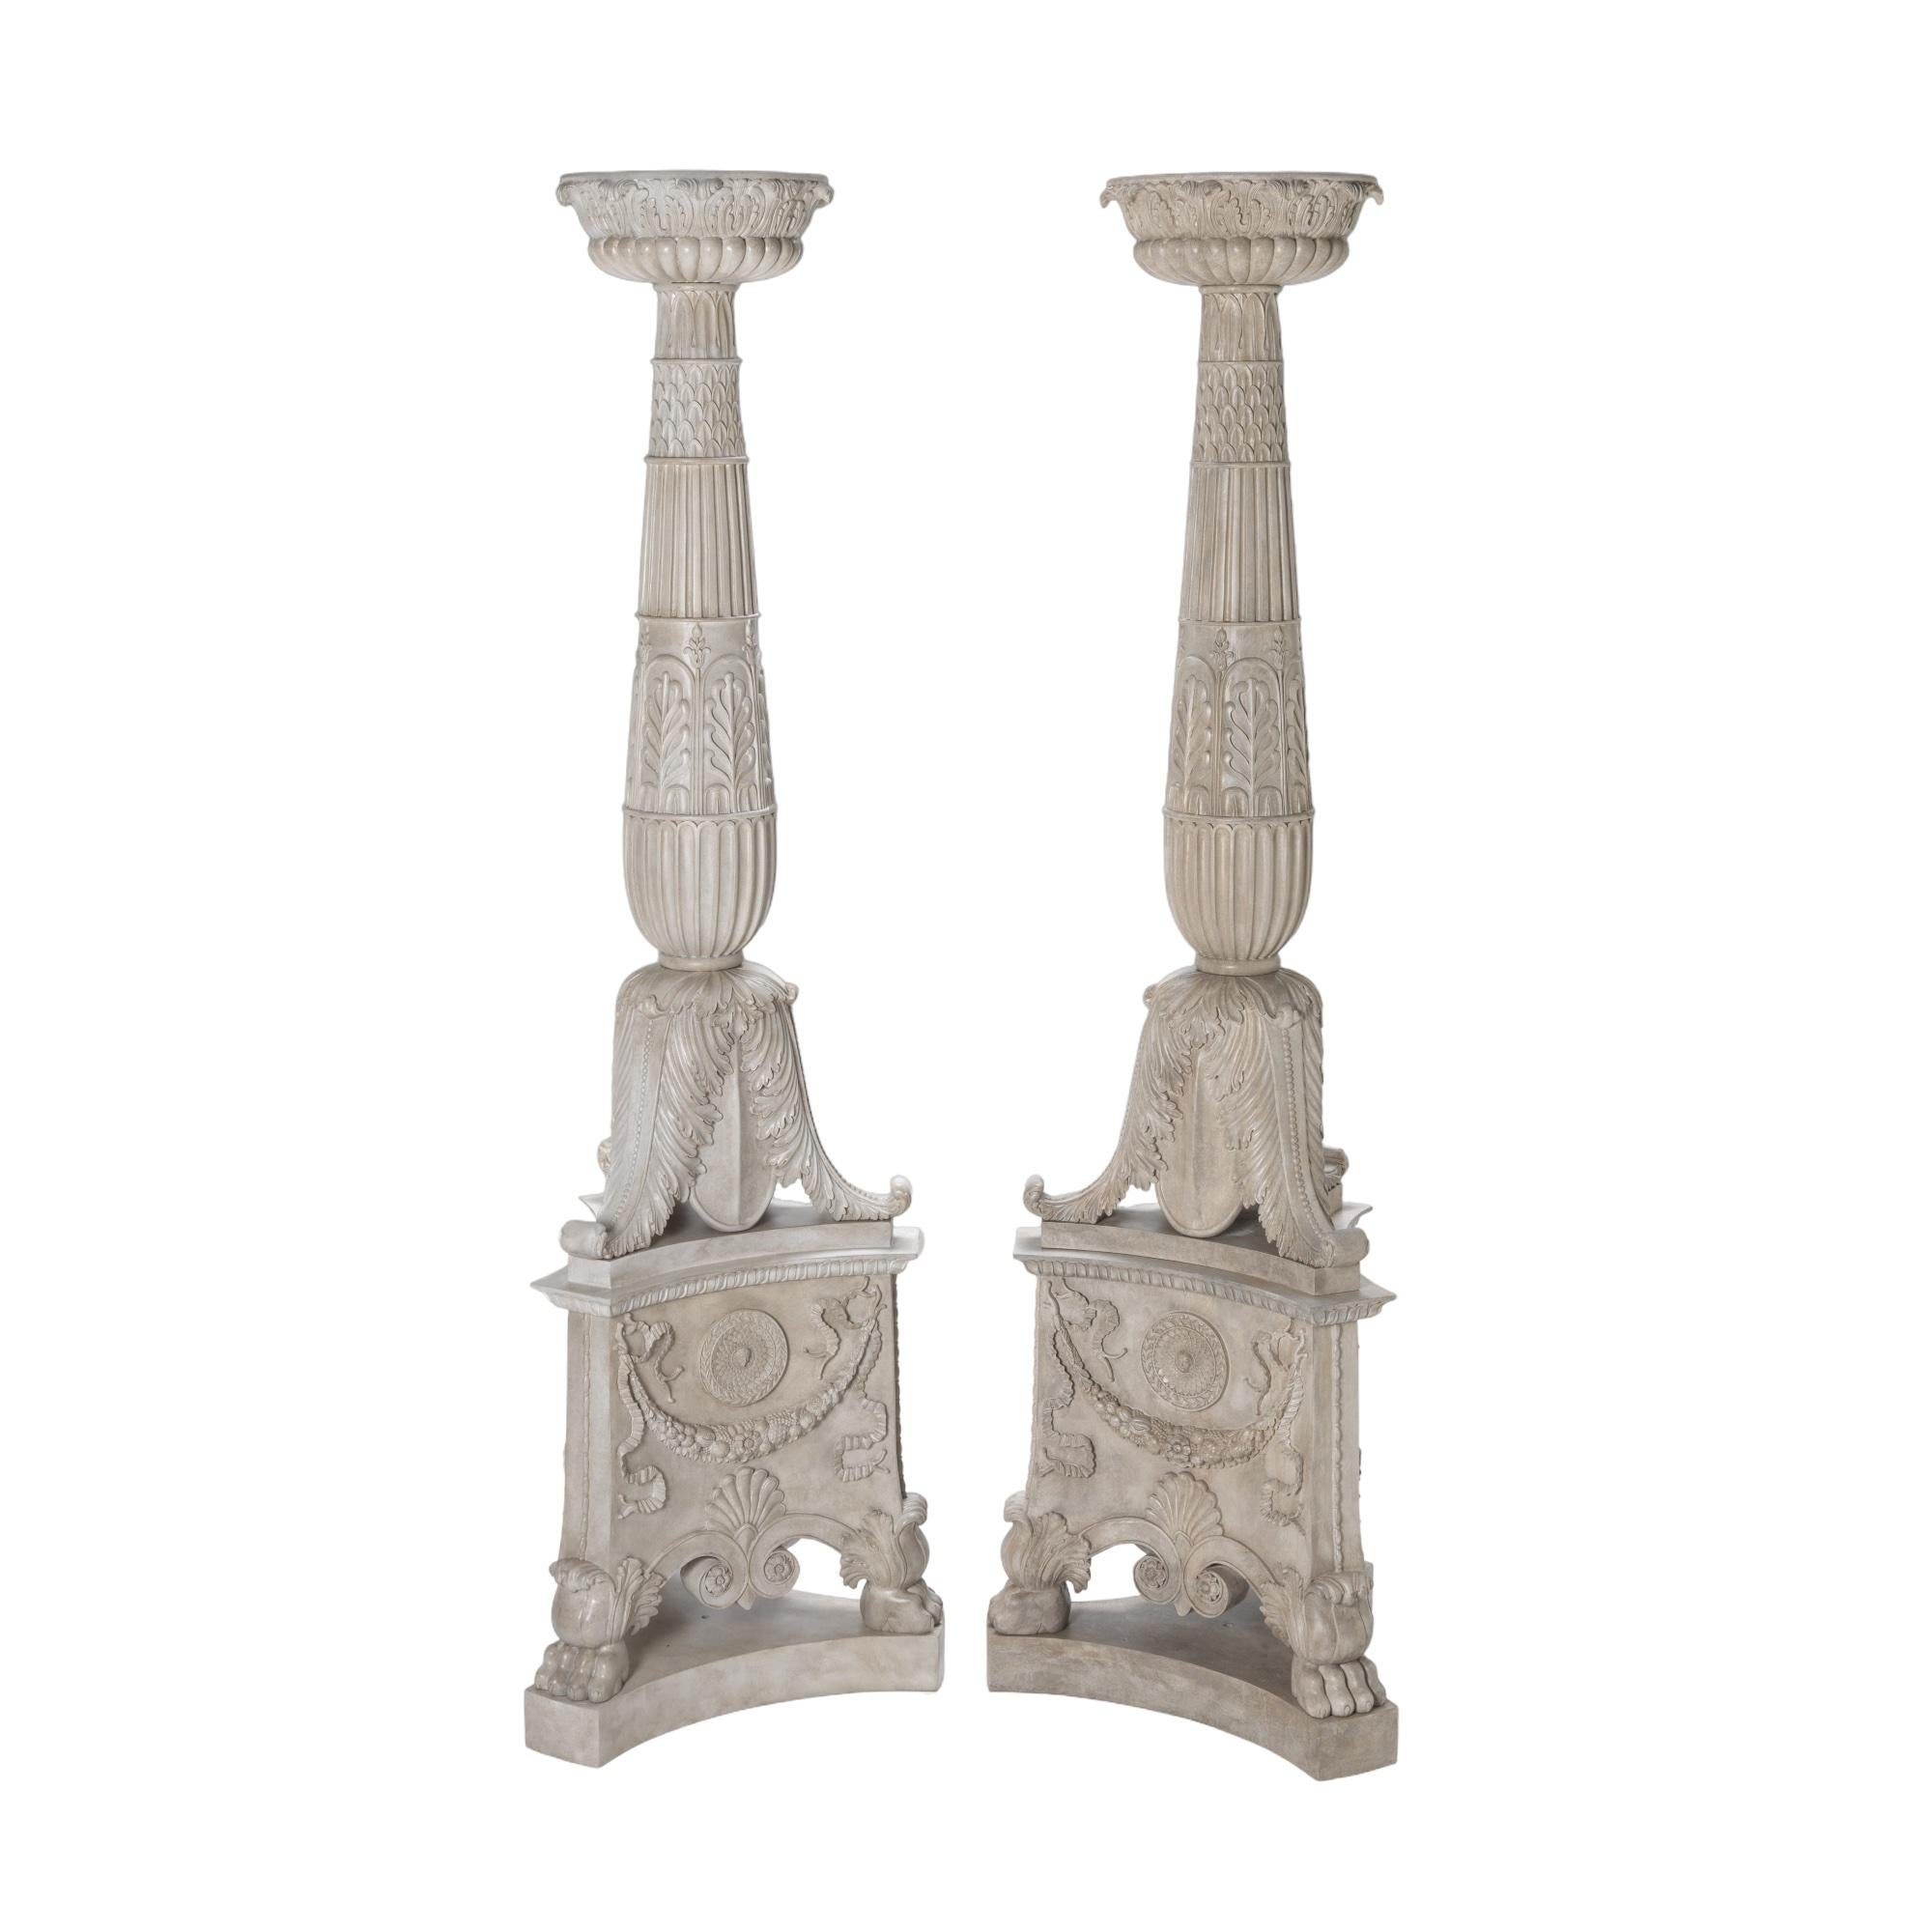 A monumental pair of finely carved Mahogany Grand Tour design specialist aged painted and gesso decorated torcheres.